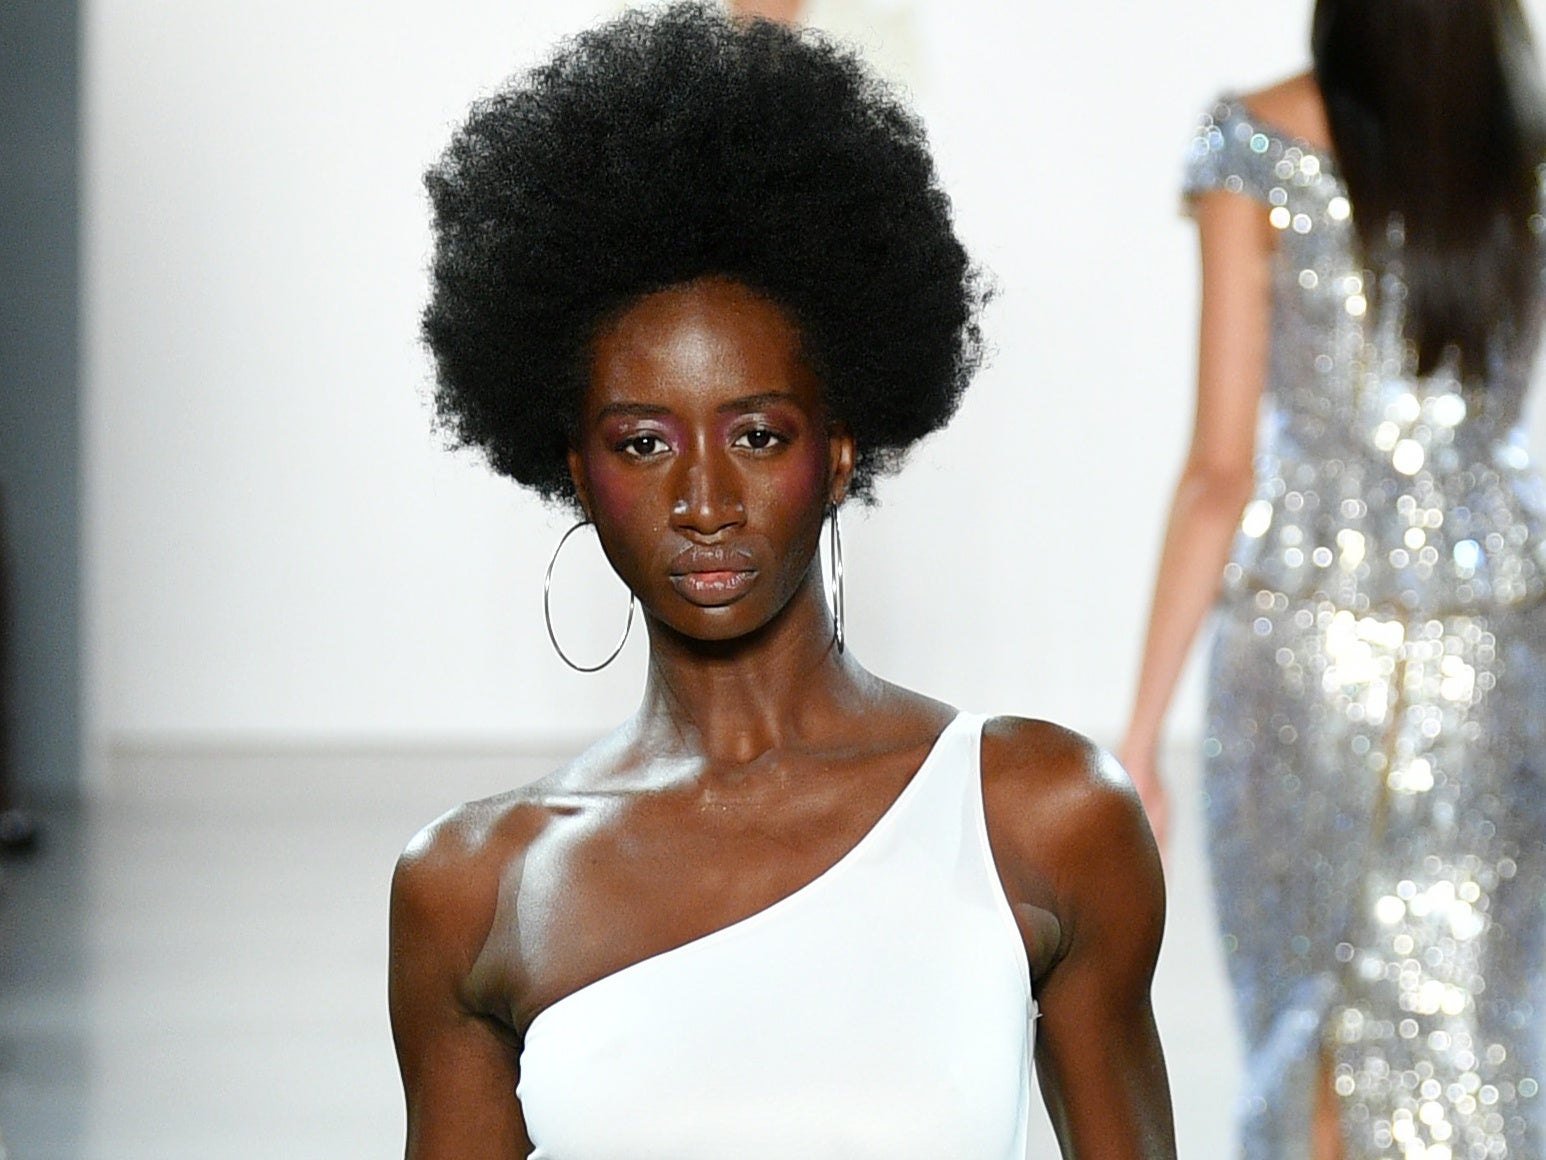 NYFW: Aliette's Spring/Summer 2020 Collection Paid Homage To Black Women